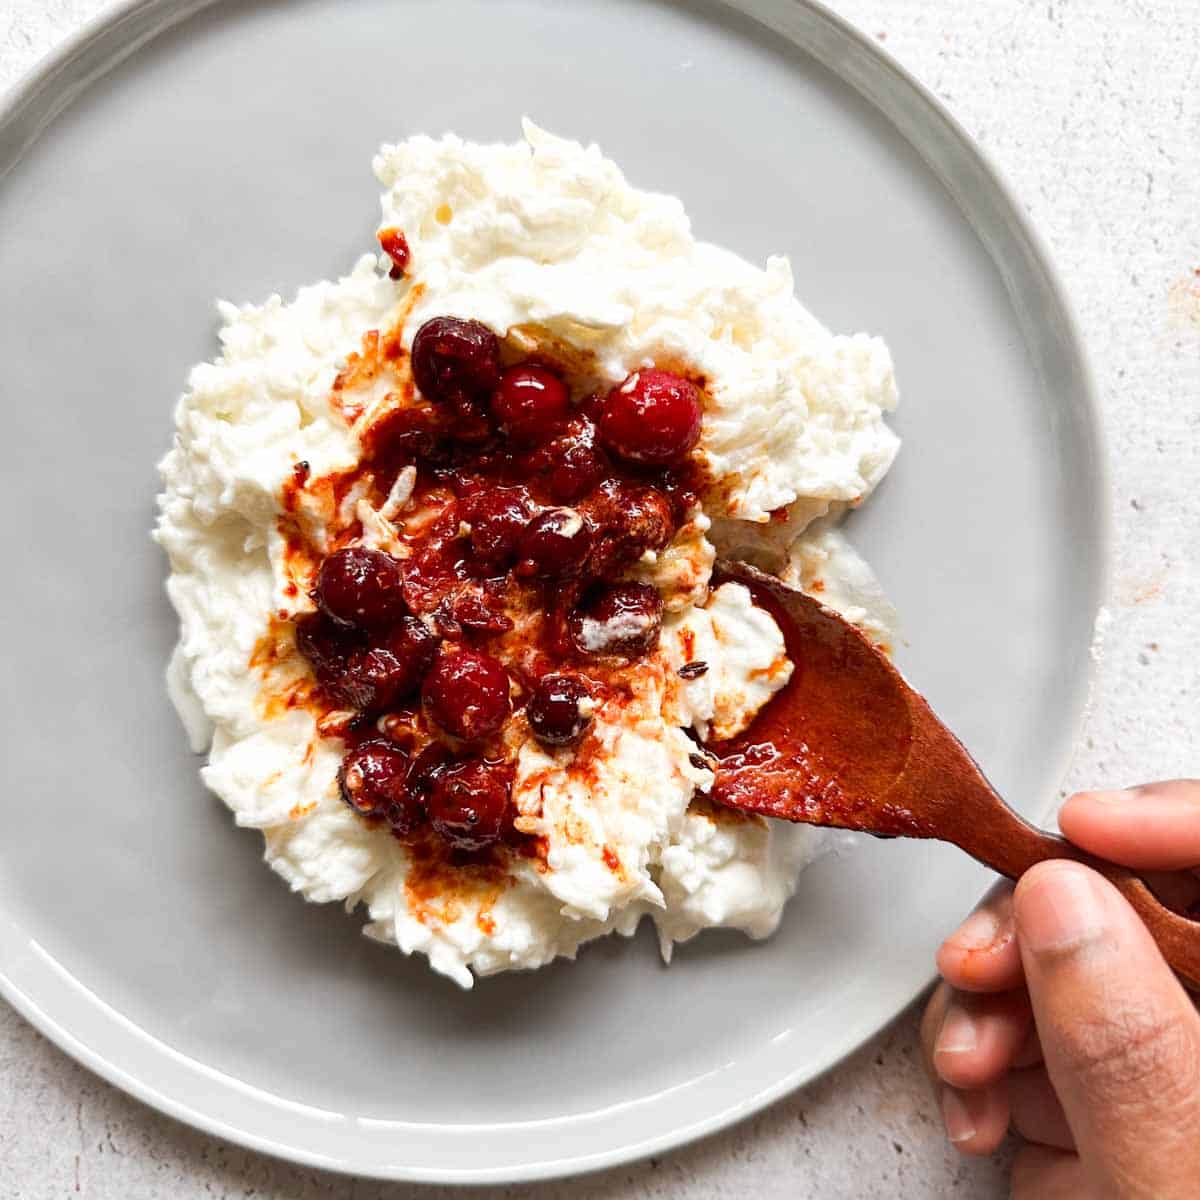 Yogurt rice with cranberry achar on top. A brown hand scooping some rice and achar.